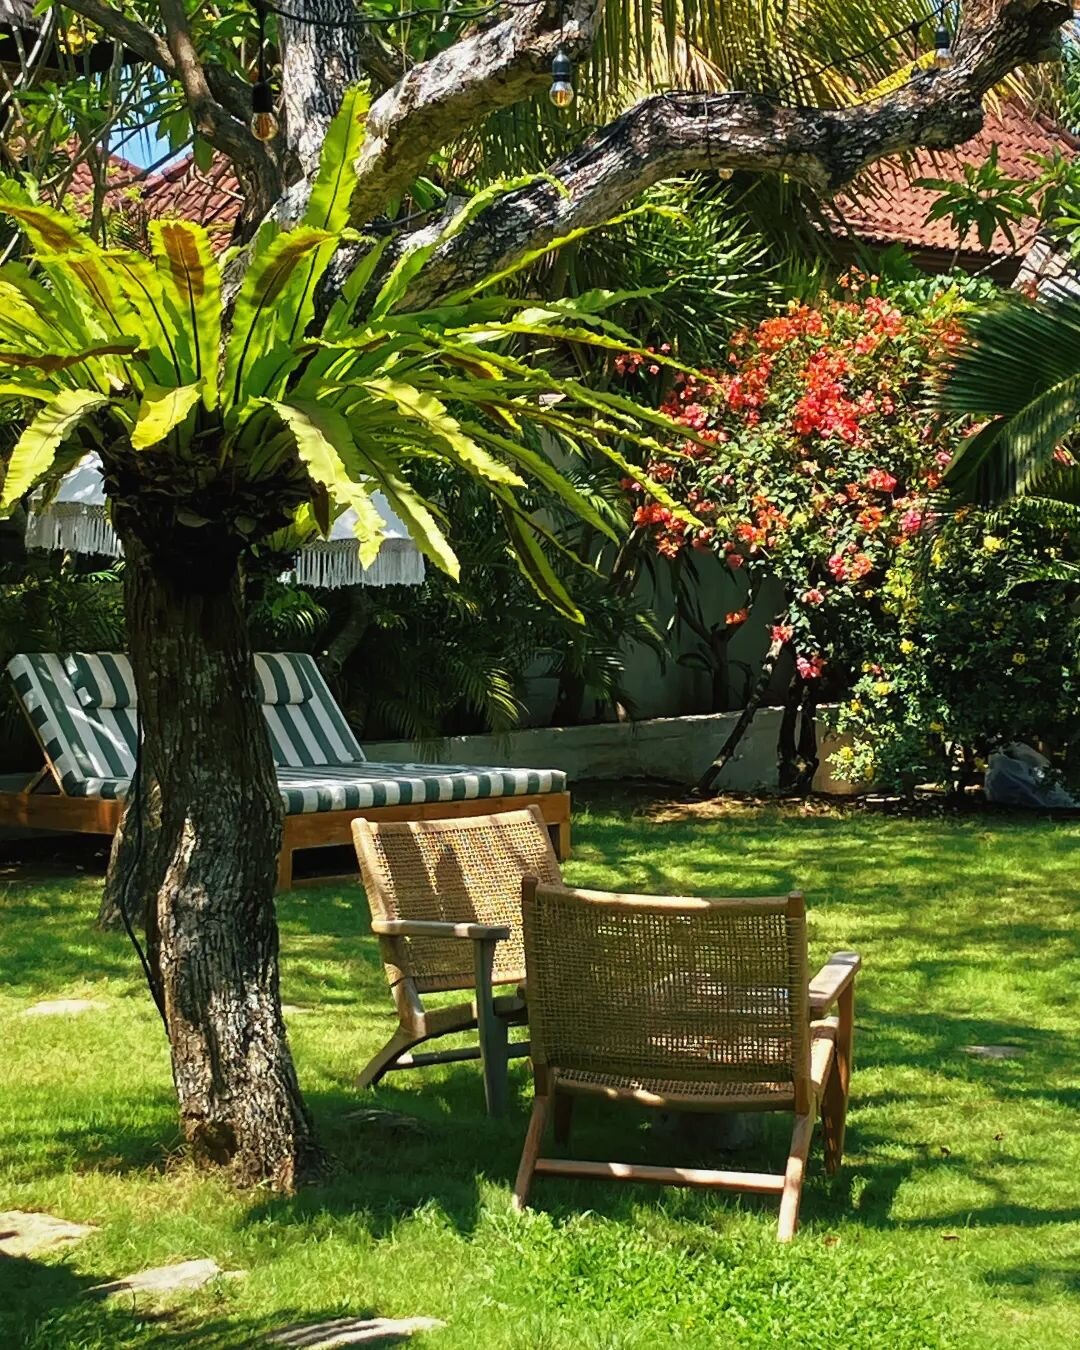 Nee garden set up 🌴
Best spot for breakfast or dinner?
You let us know 😊

#mulemalu #staytropical #garden #bali